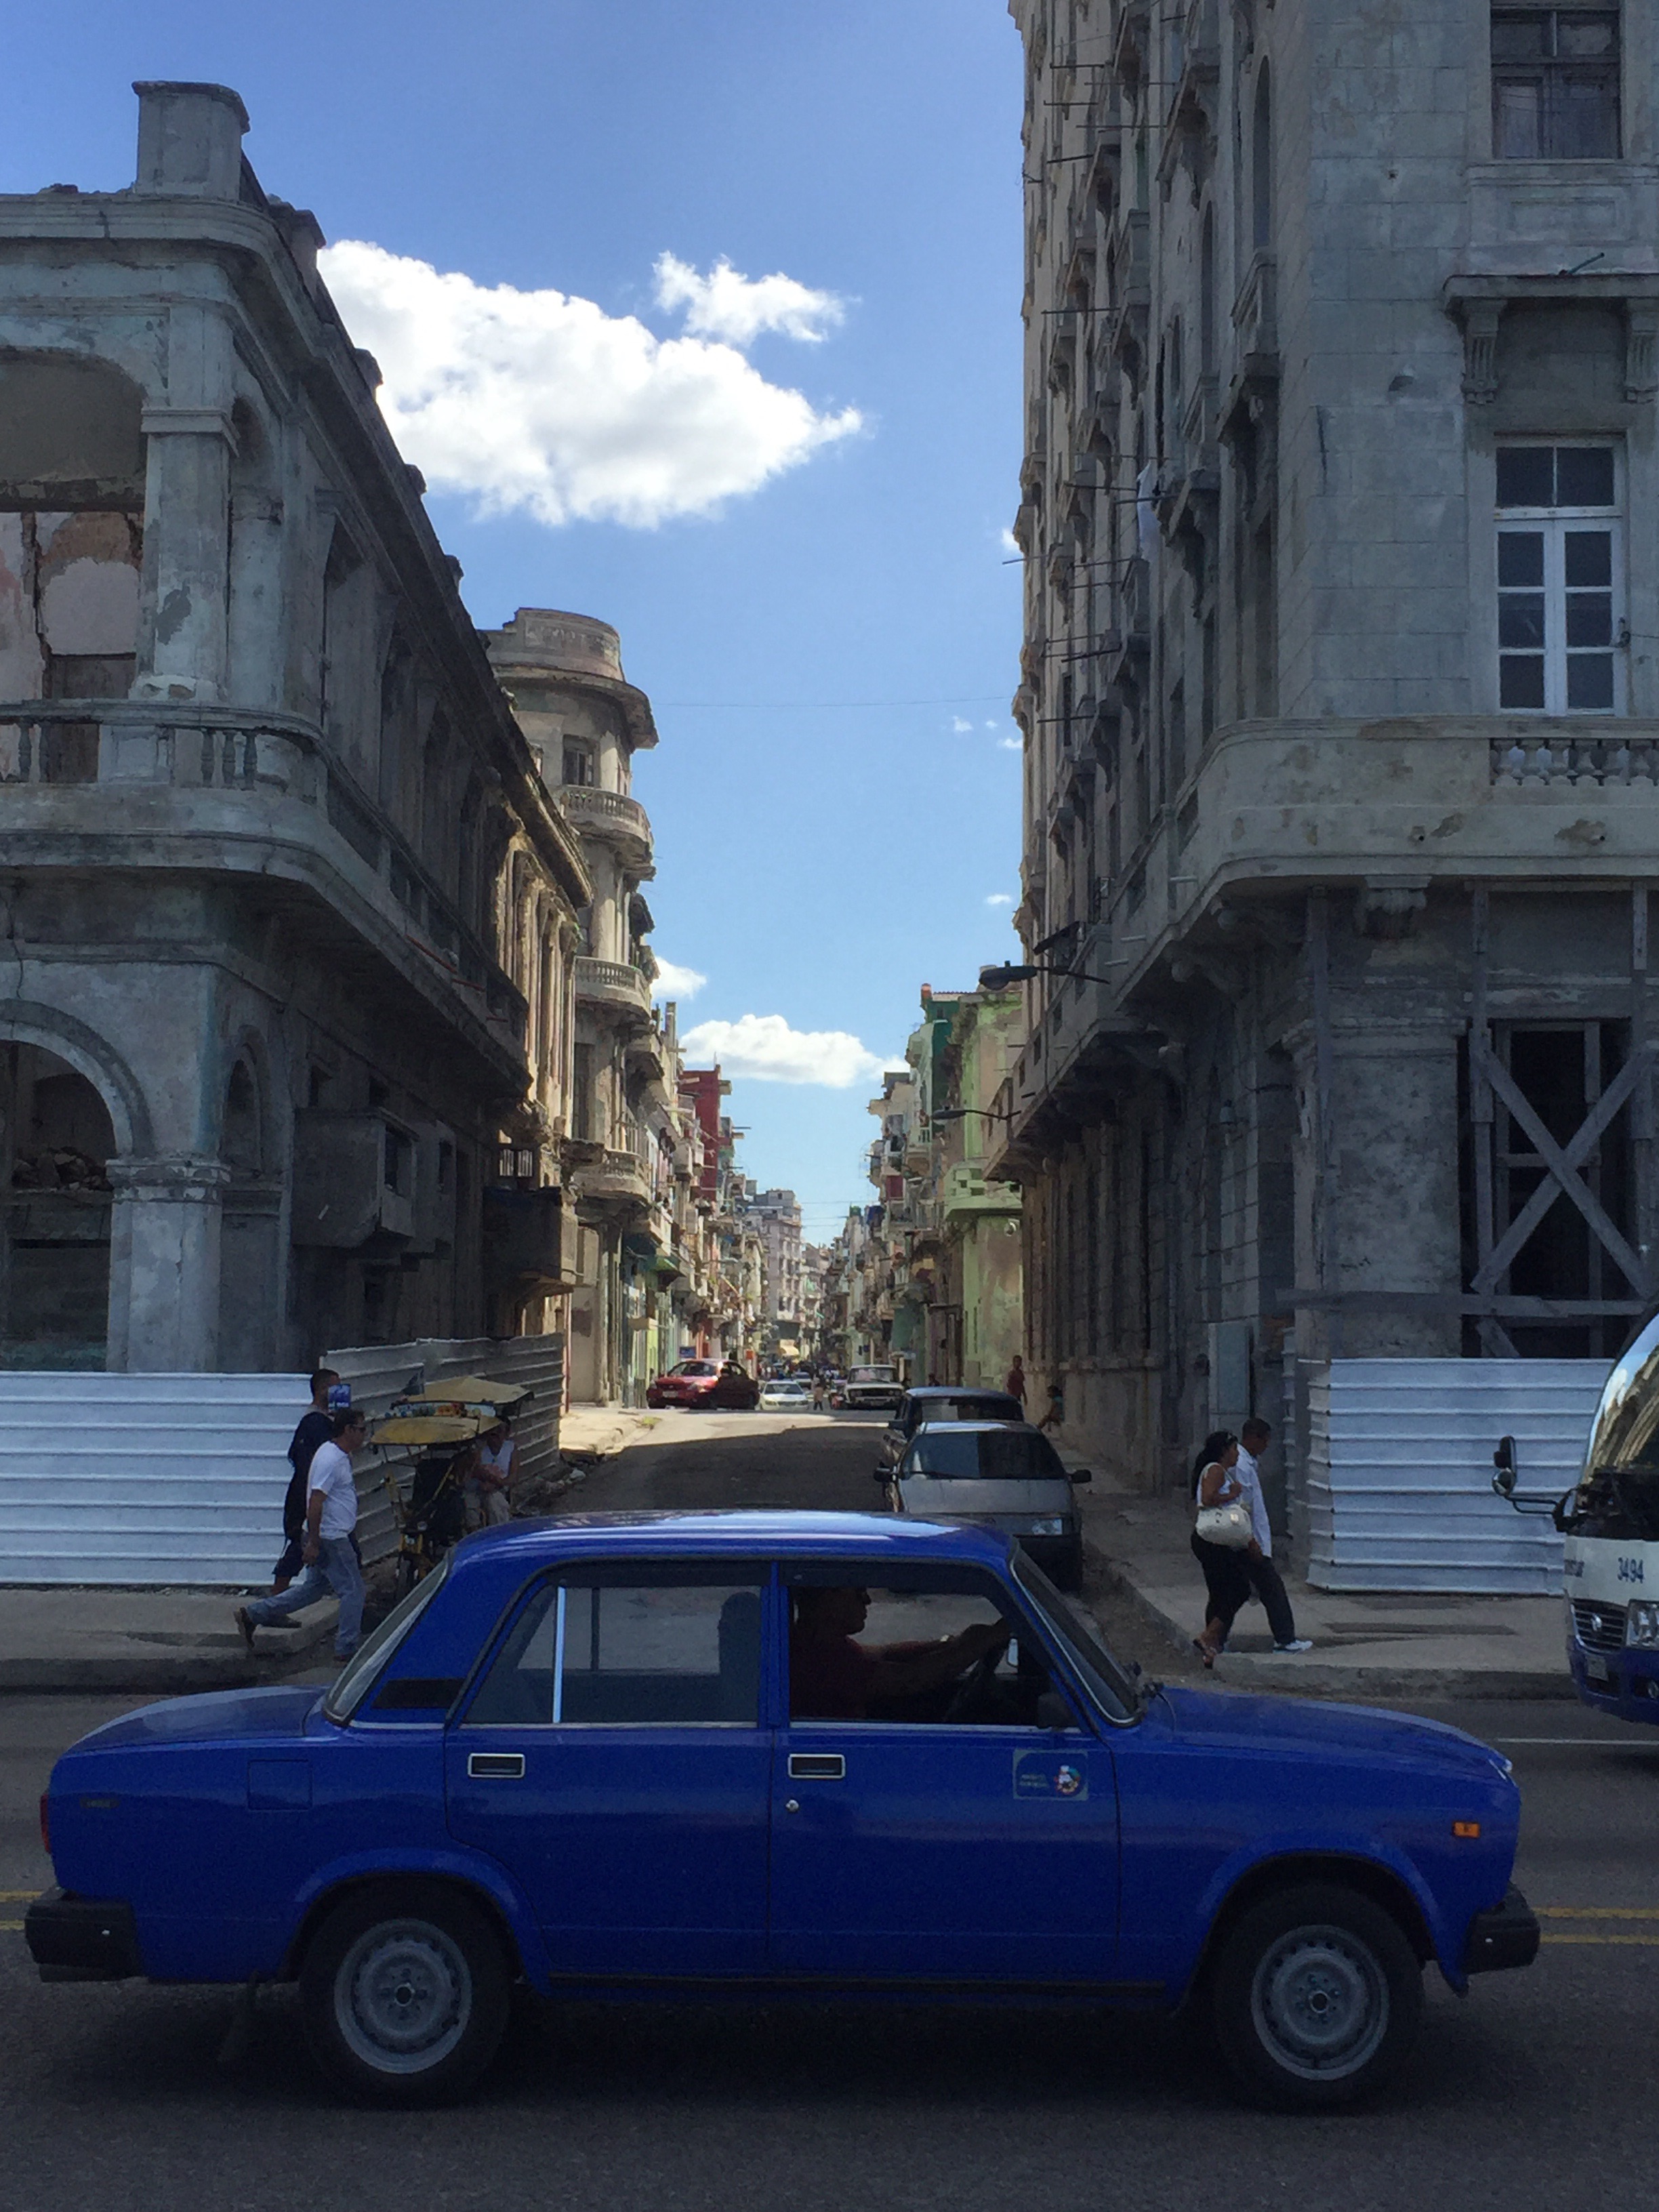 a blue car on a street with buildings and people walking